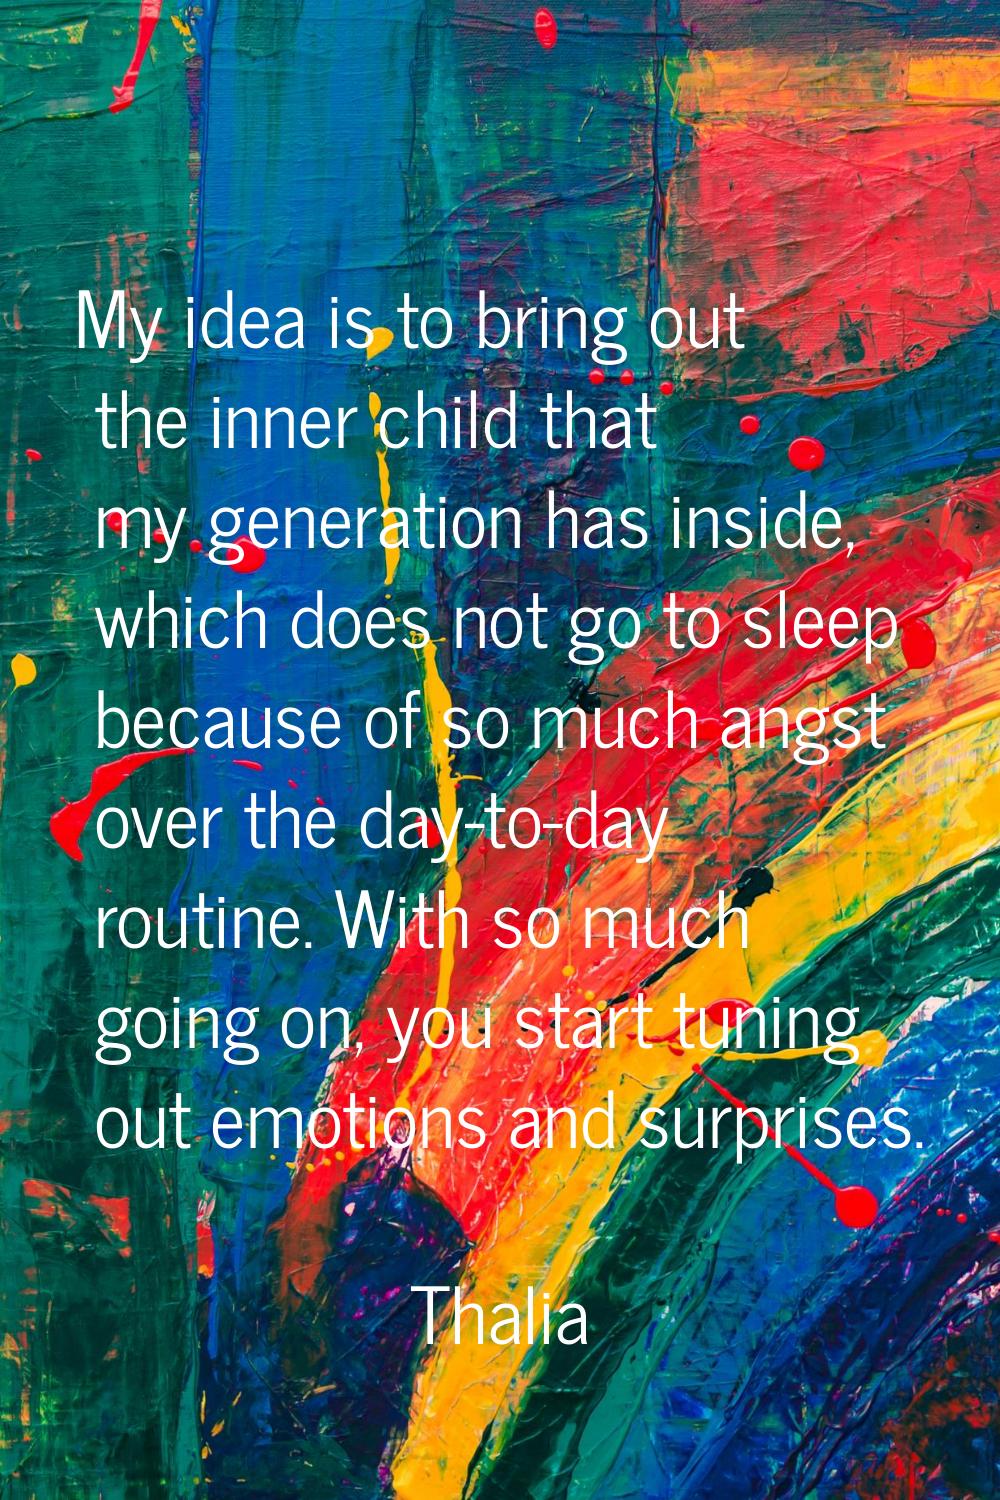 My idea is to bring out the inner child that my generation has inside, which does not go to sleep b